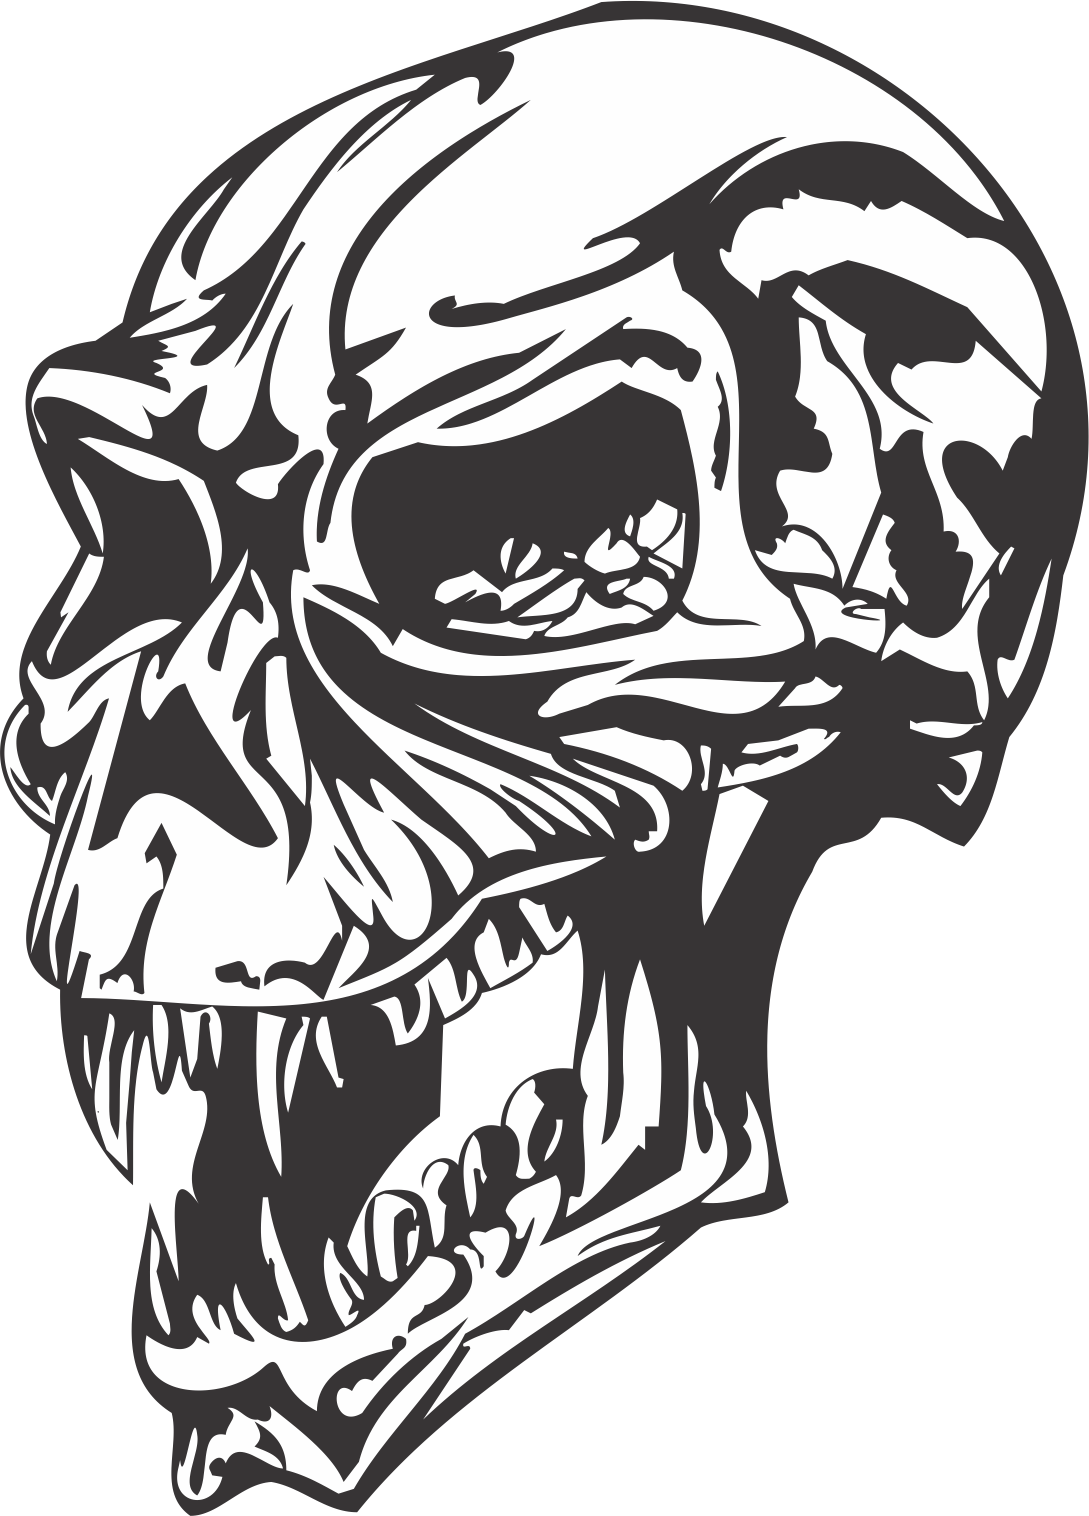 Angry Skull Free DXF File